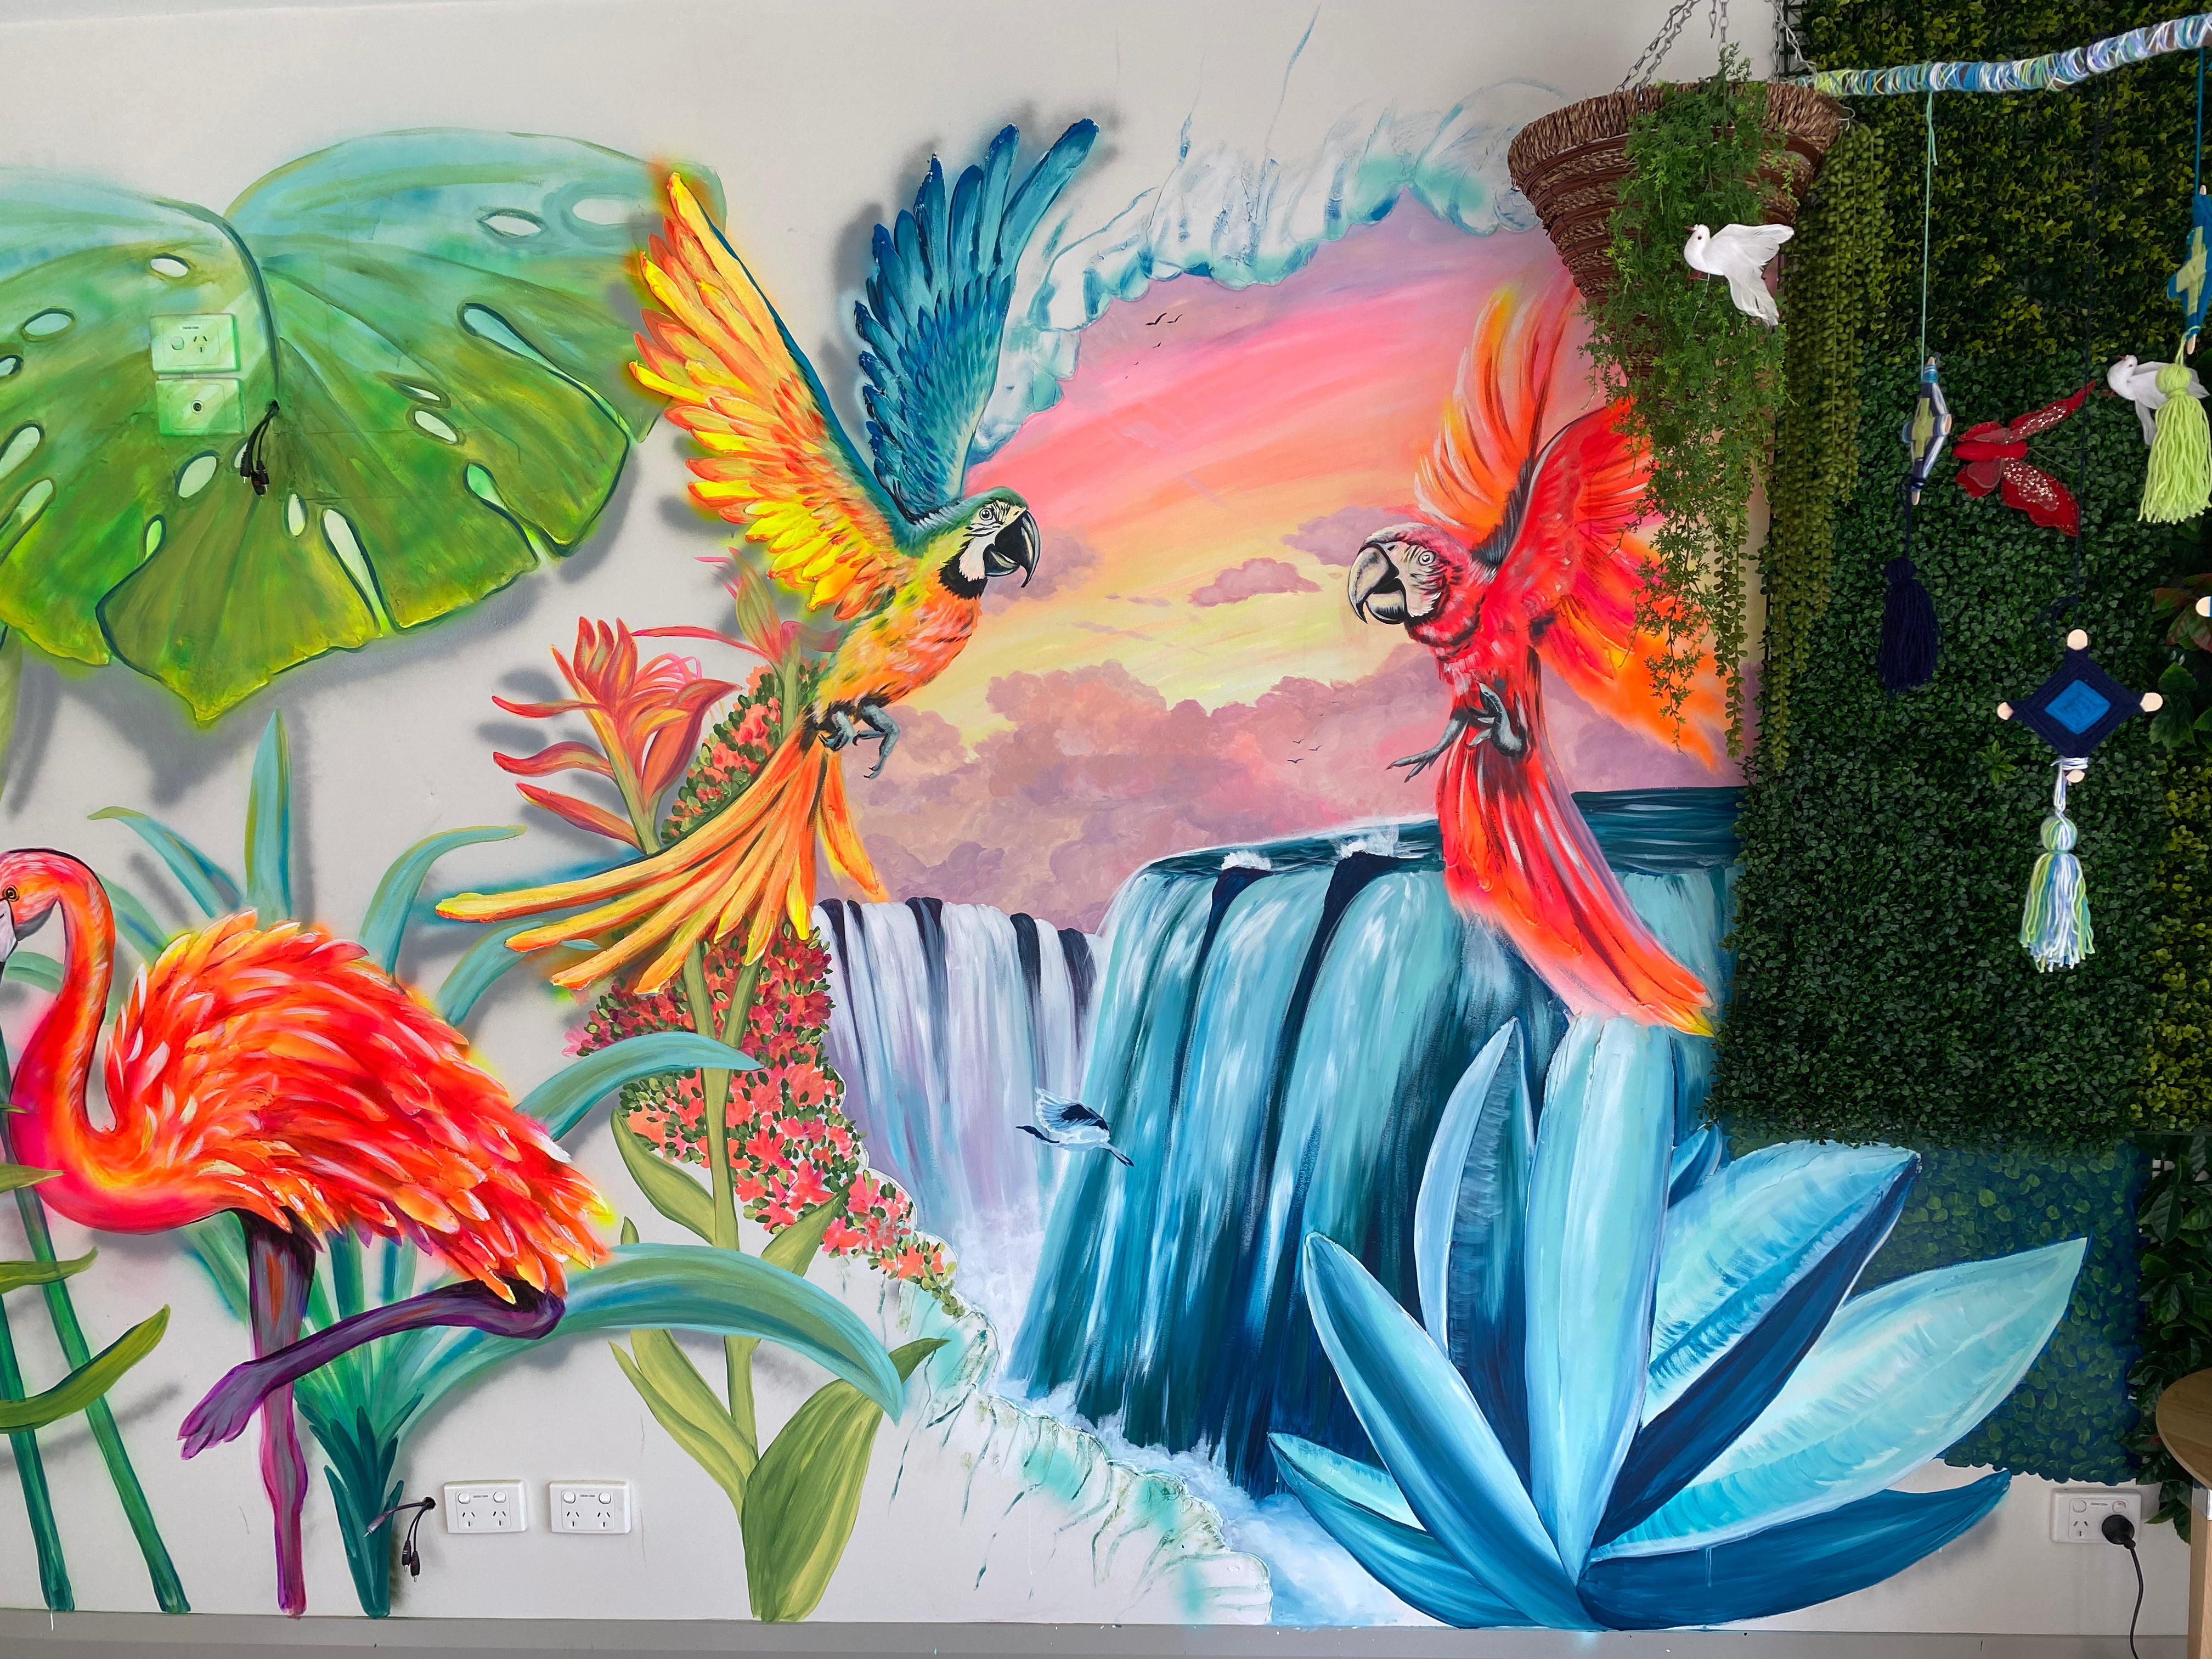 TROPICAL waterfalls and  vivid PARROTs with texture elements